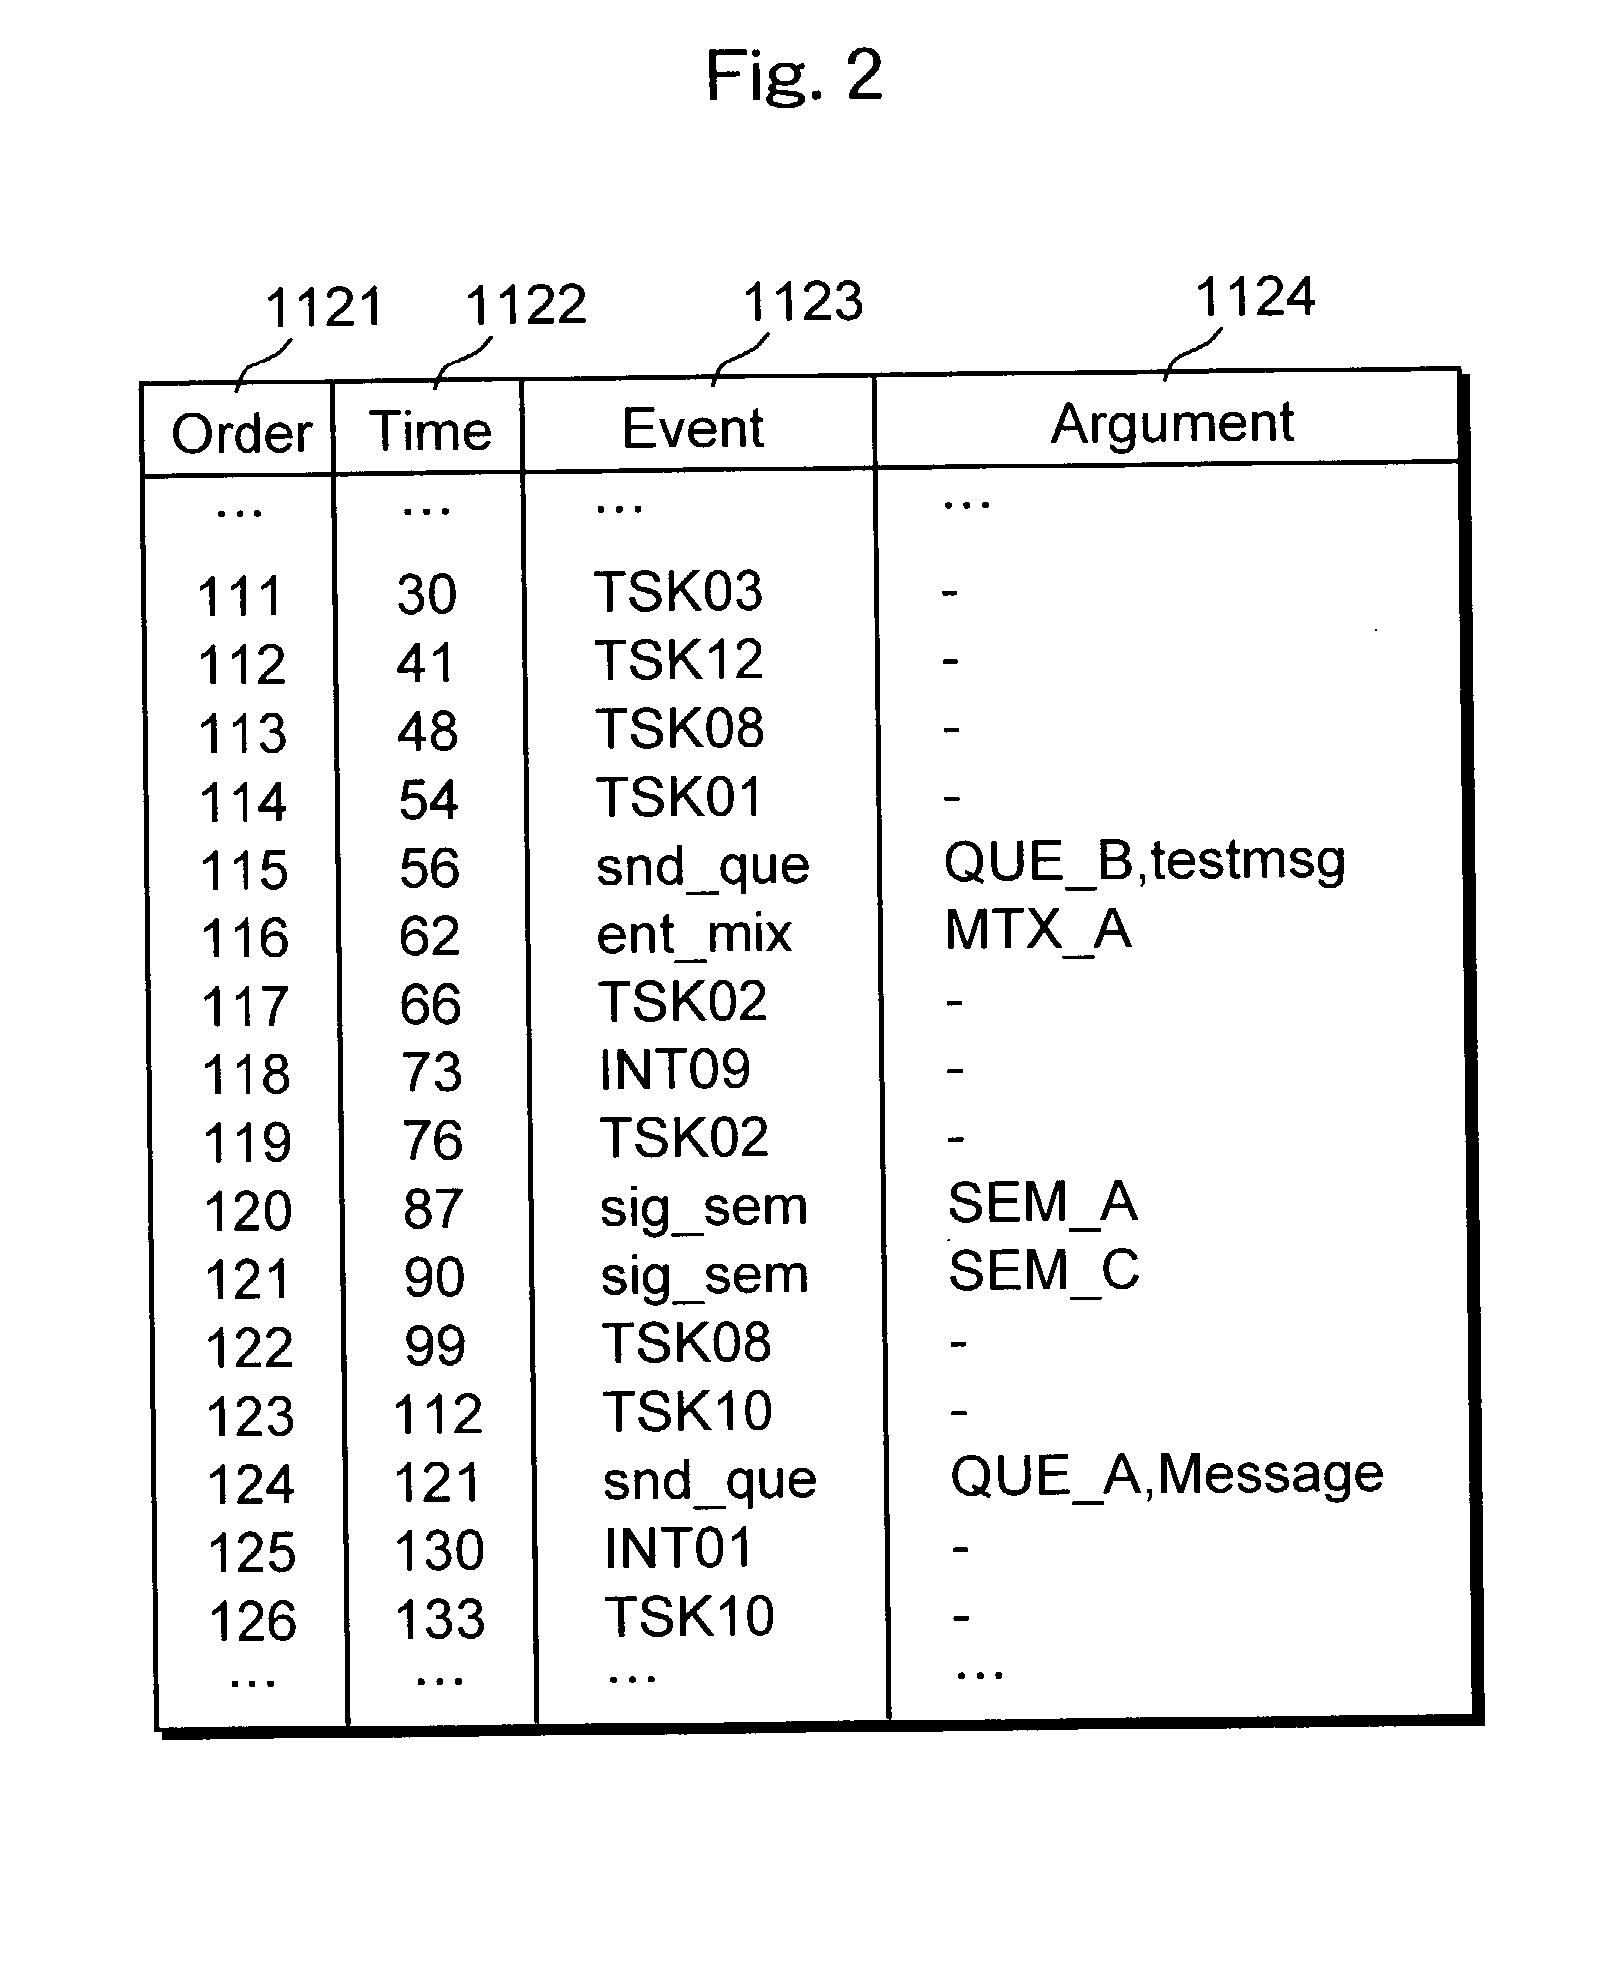 Trace information searching device and method therefor